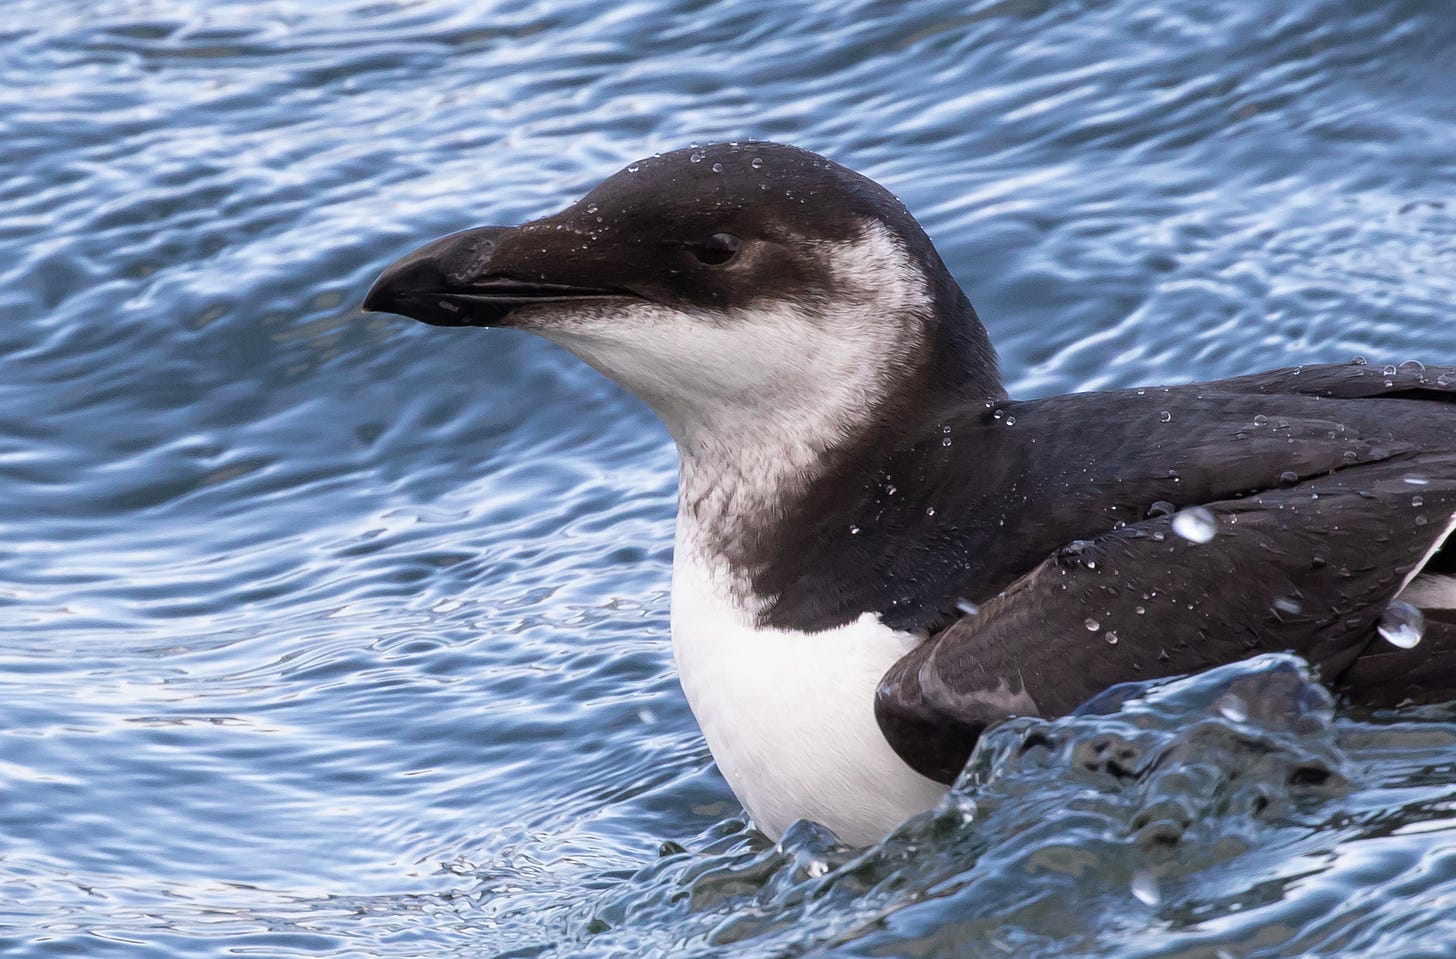 a razorbill facing left, taking up most of the image (its rear end is cut off). water is splashing uo against its side. it is a juvenile - it has a thinner dark beak and pale goes lal the way up to underneath and behind its eye. it is facing left.